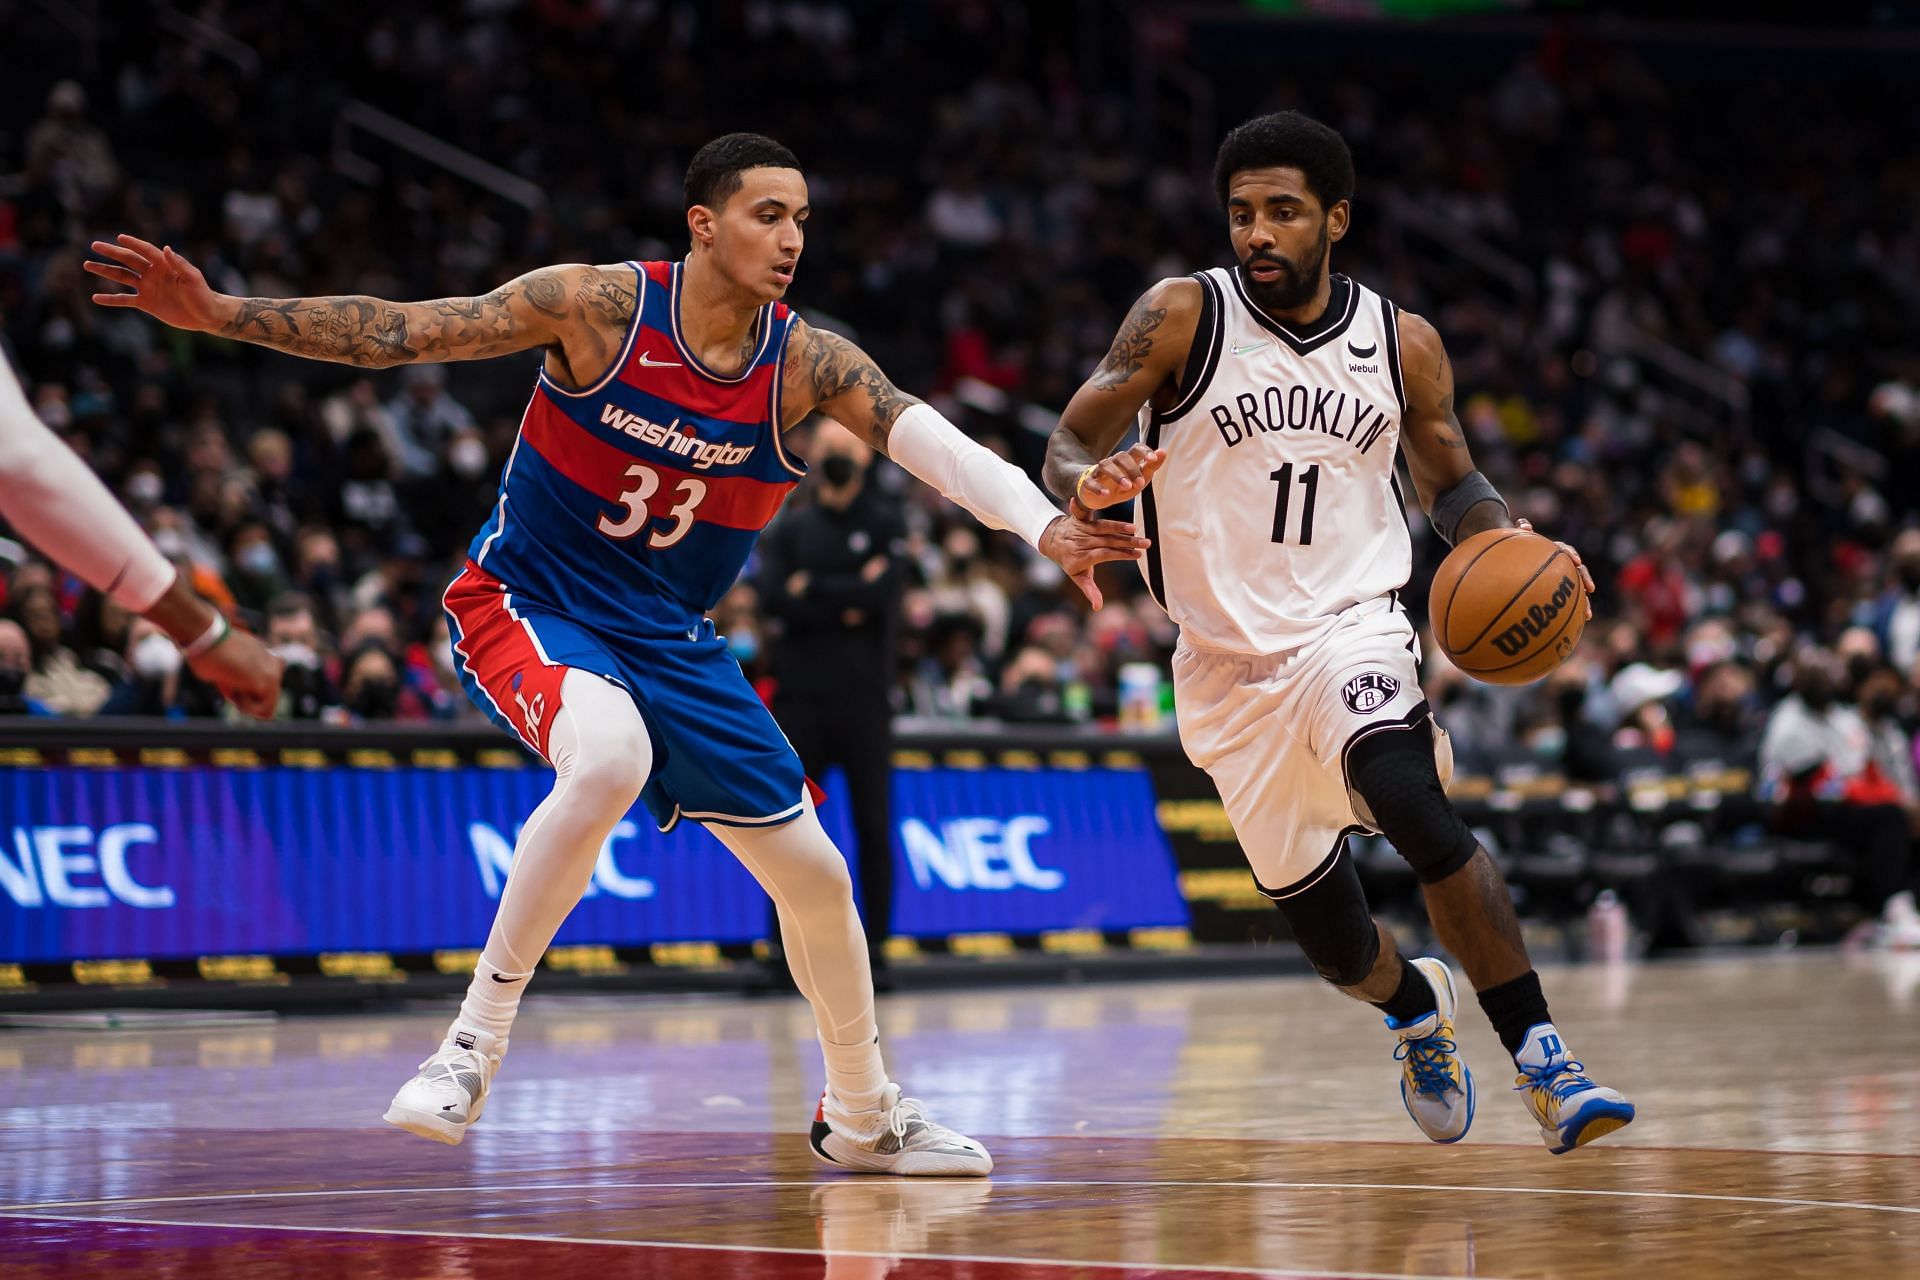 Kyrie Irving (#11) of the Brooklyn Nets goes up against Kyle Kuzma (#33) of the Washington Wizards